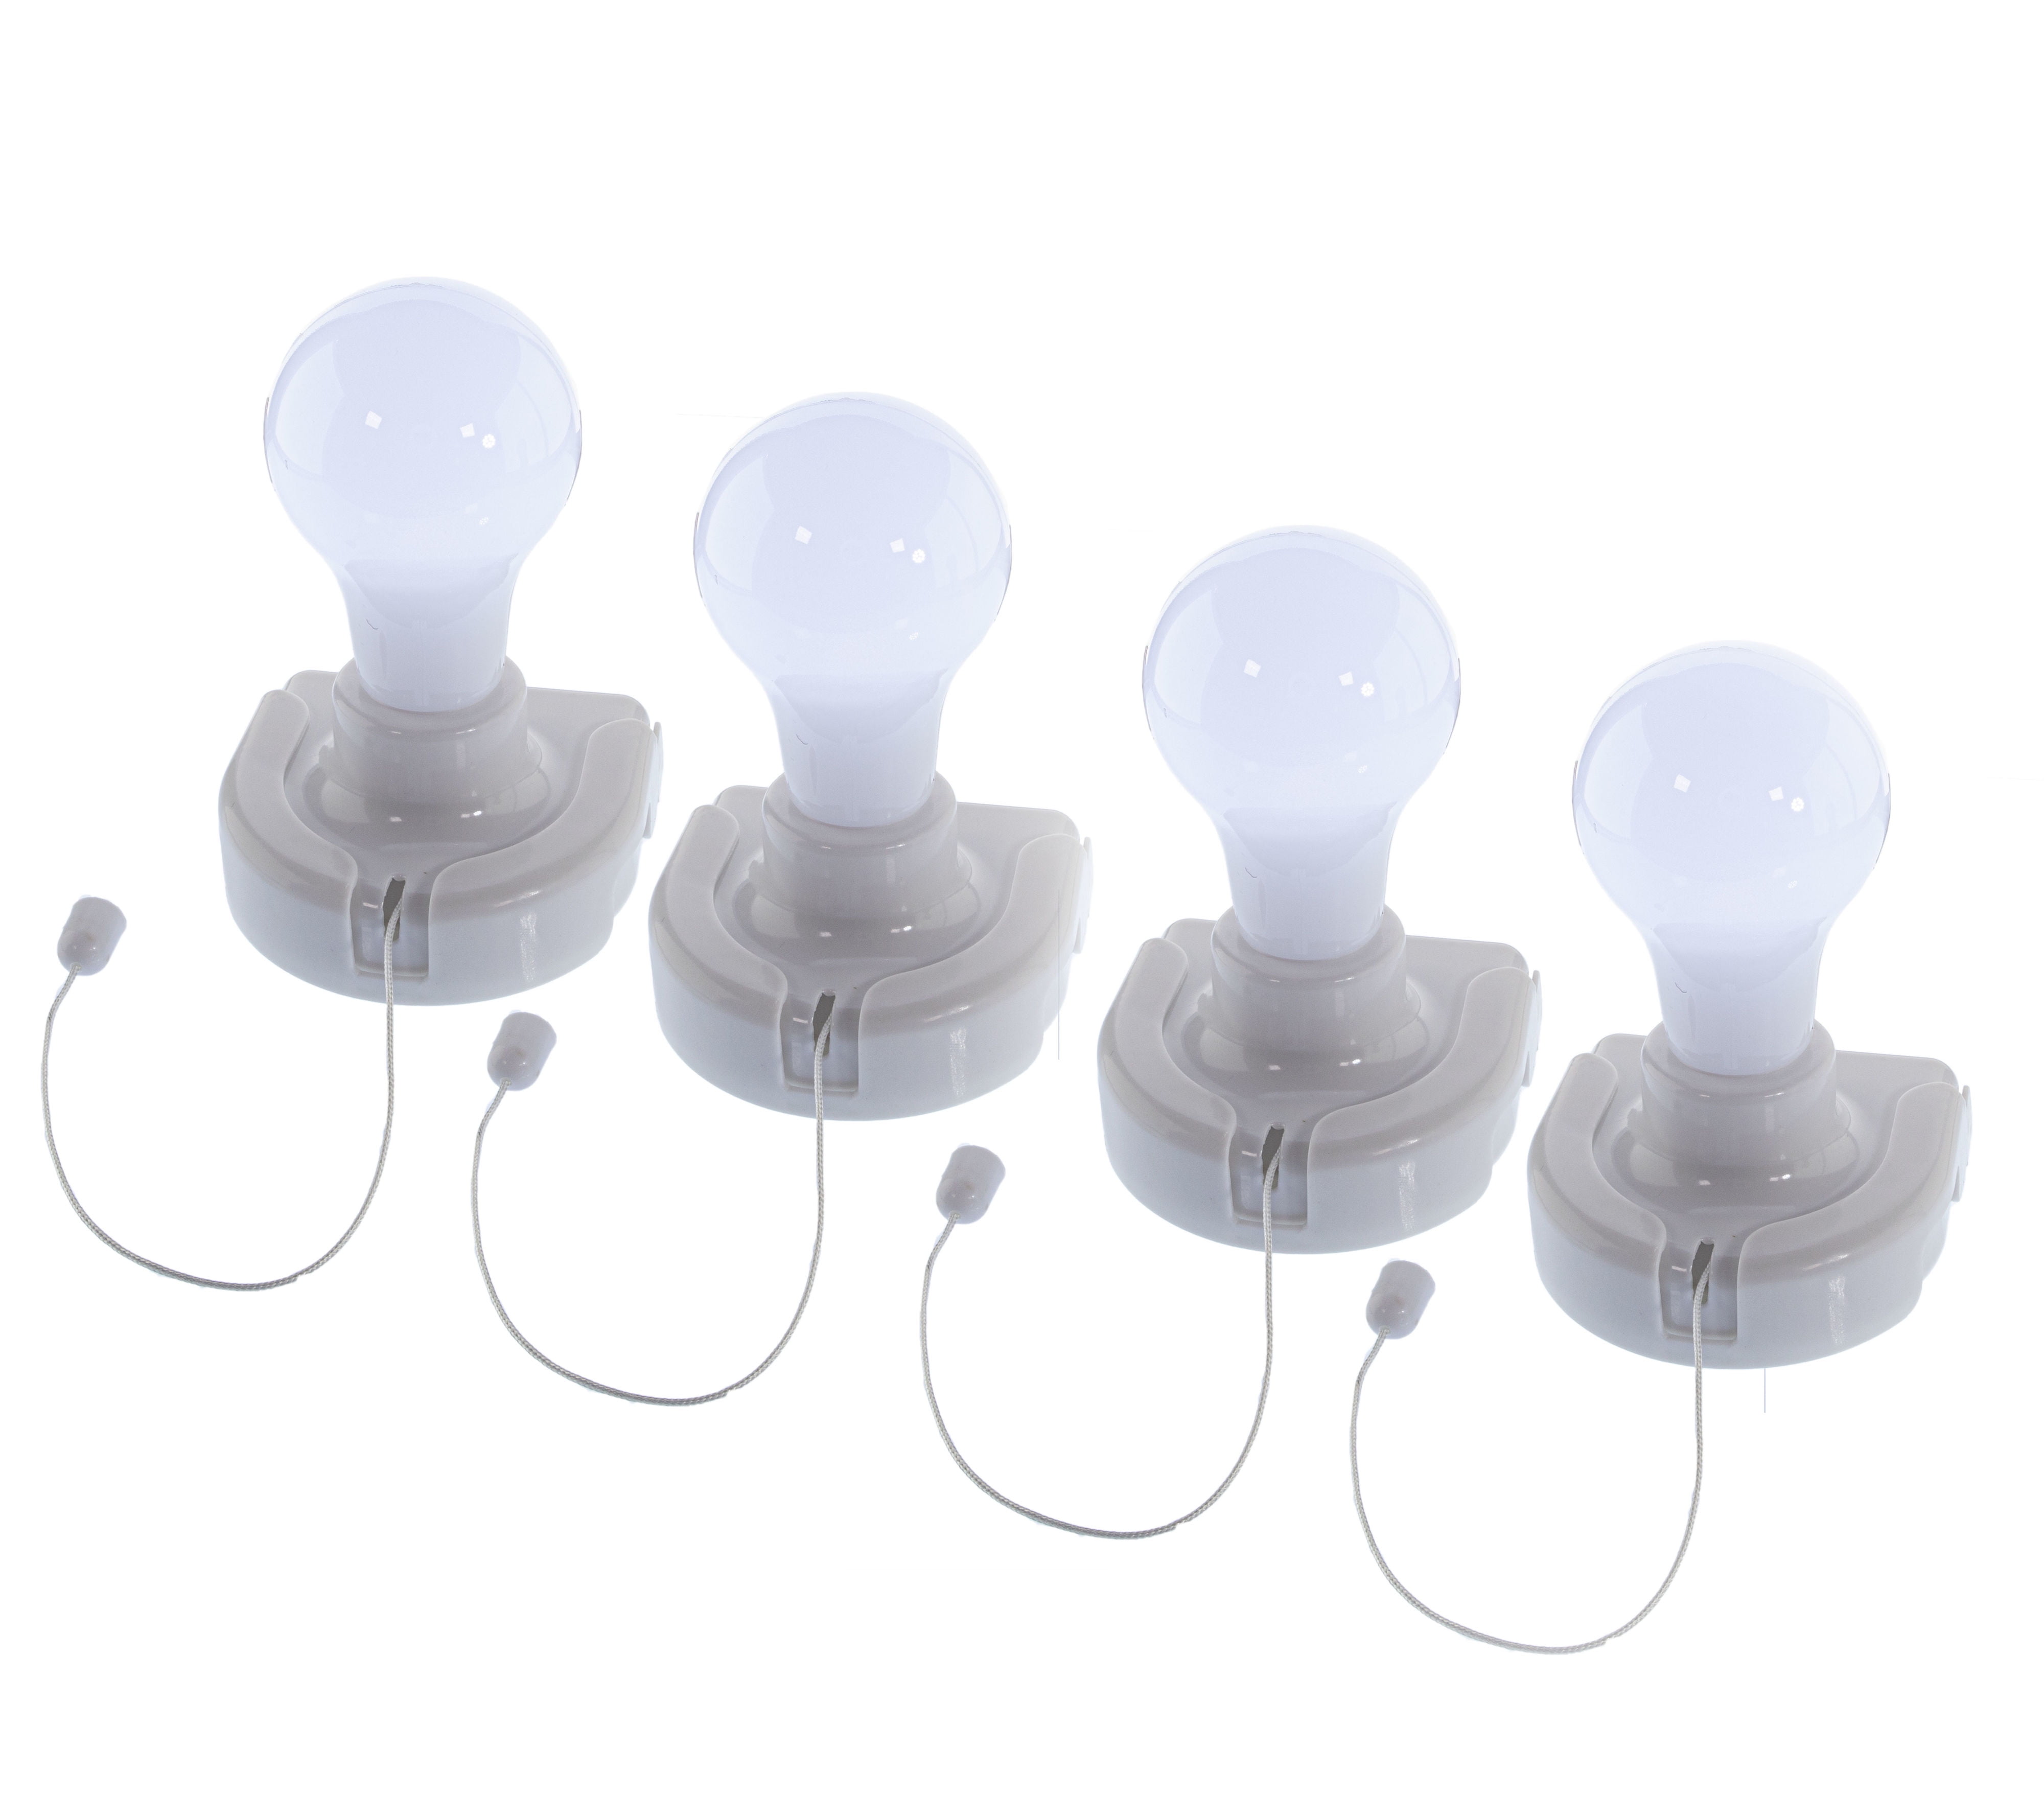 ser godt ud Skilt Distrahere Wireless Instant Portable Light Bulb Cordless Mountable Battery Operated Wireless  LED Light Light Bulbs - Bulbs Peel and Stick Anywhere - 4pc - Walmart.com